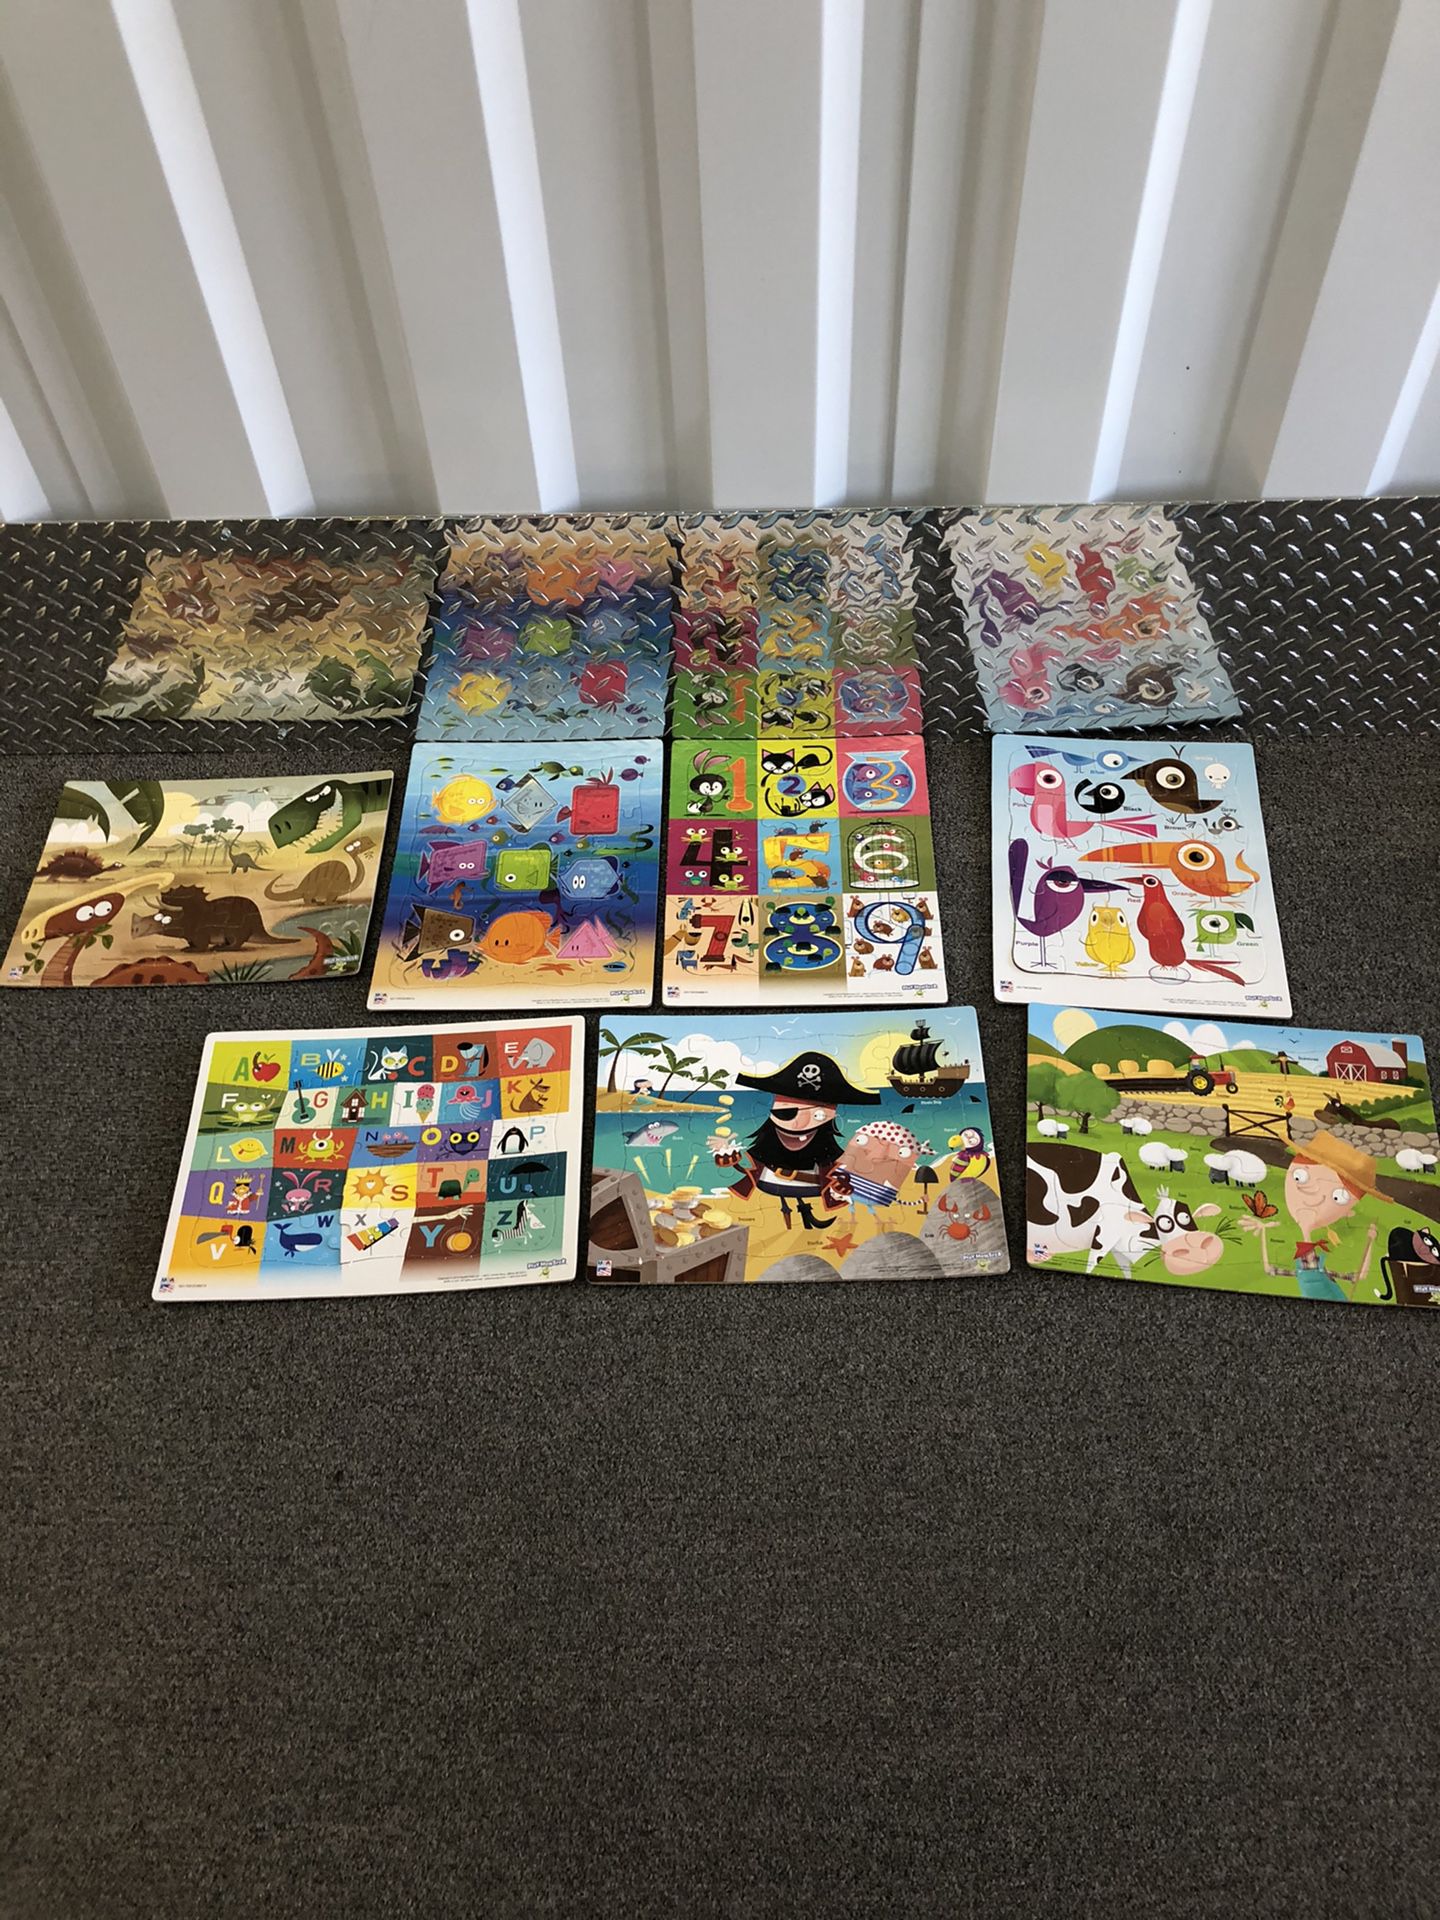 Puzzles - $15 for 12